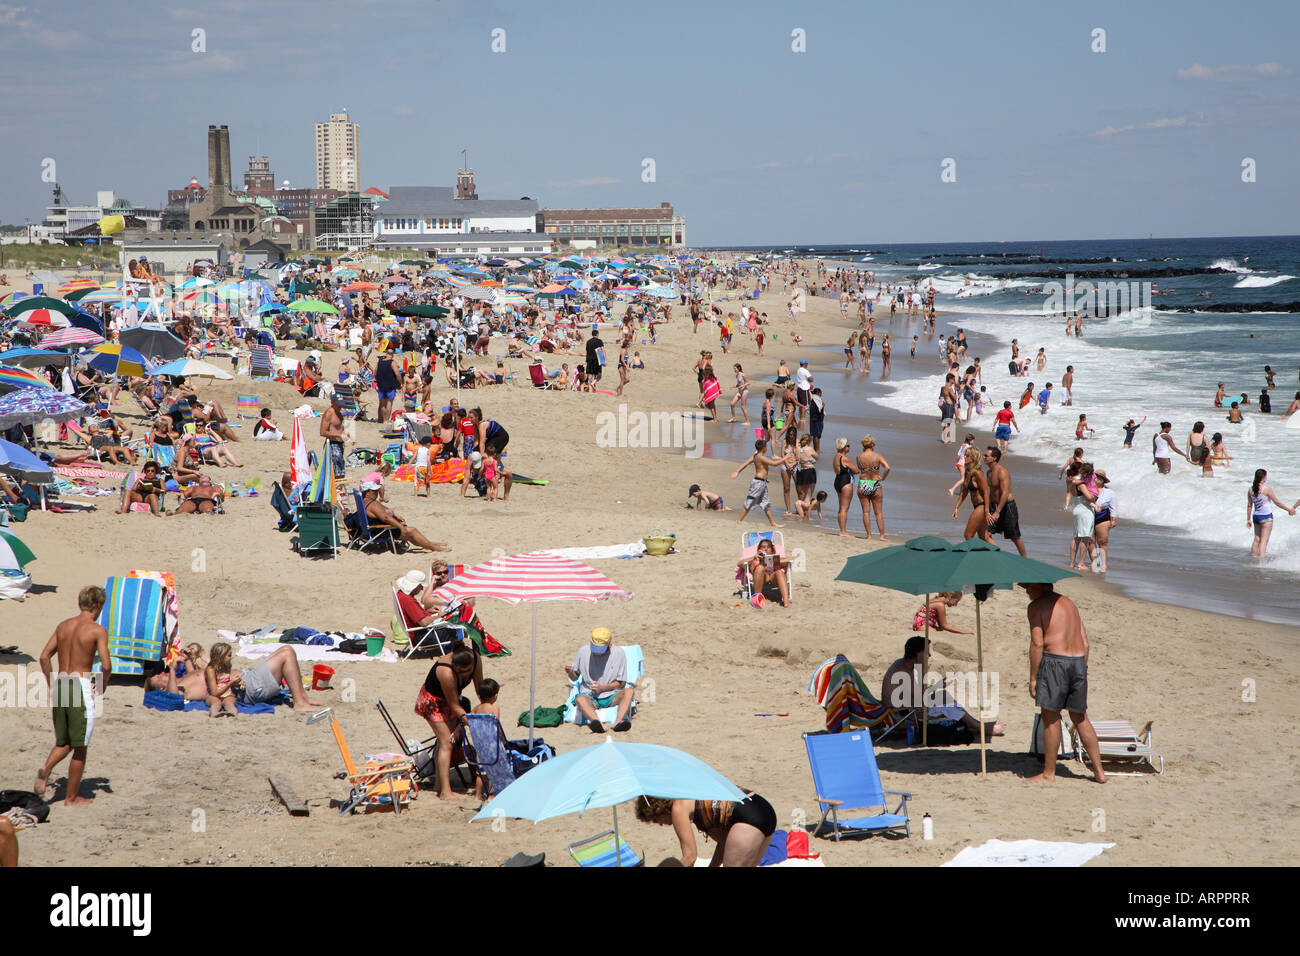 Along the surfline of a jersey shore beach with people walking, standing and splashing in the shallows. Stock Photo